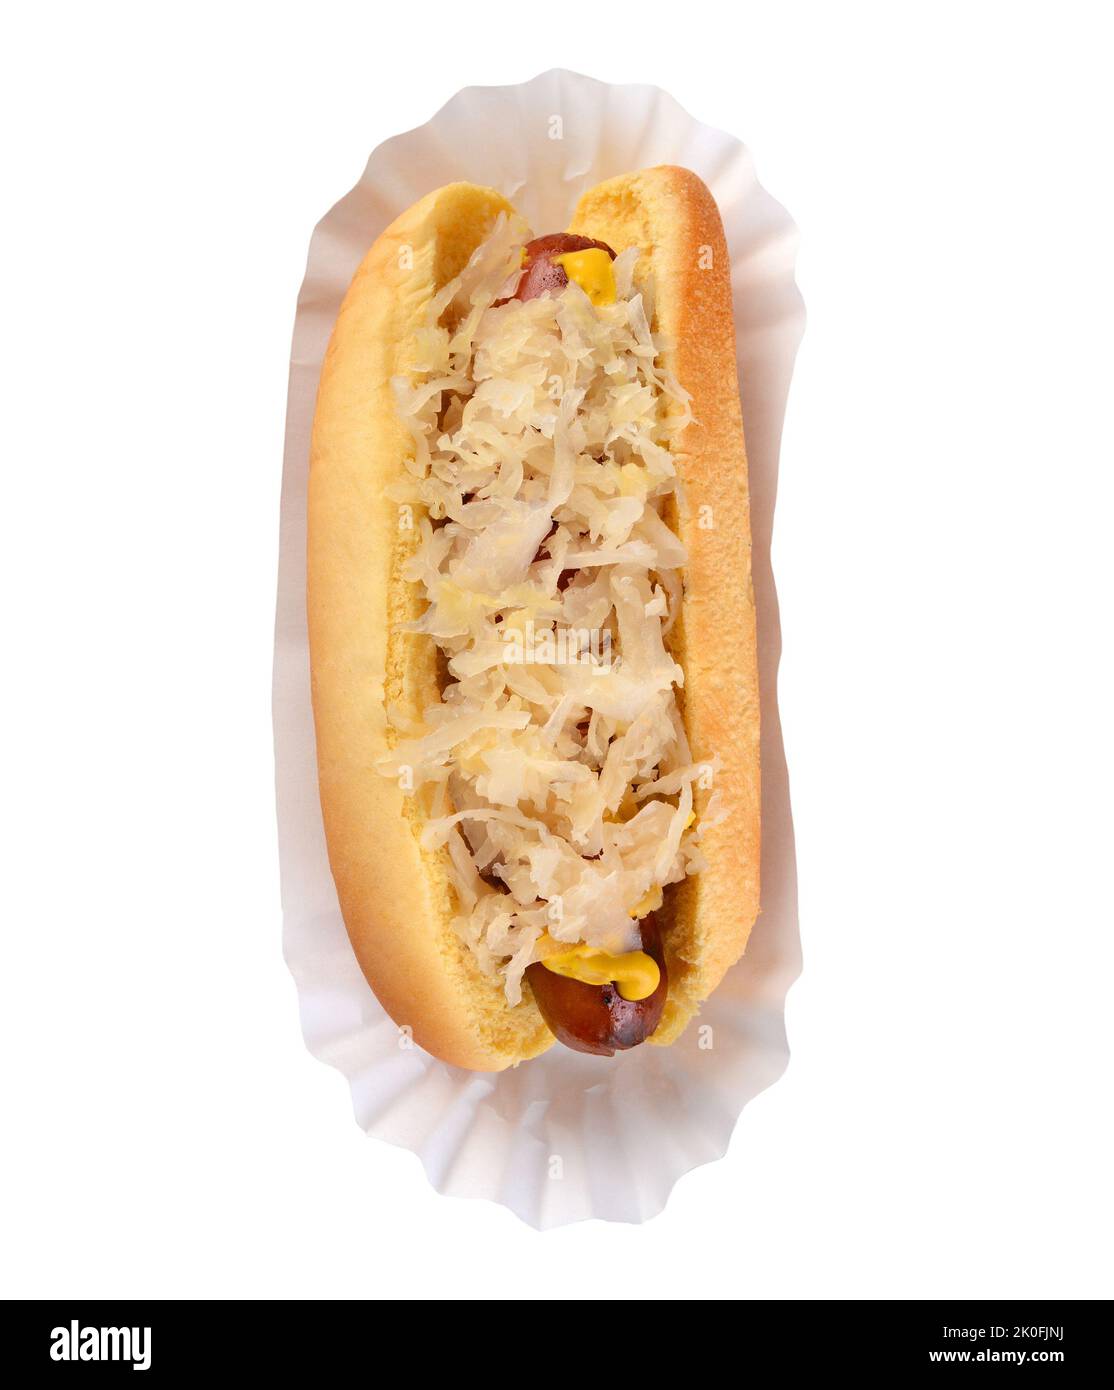 High angle shot of a hotdog with mustard and sauerkraut isolated on white. Stock Photo